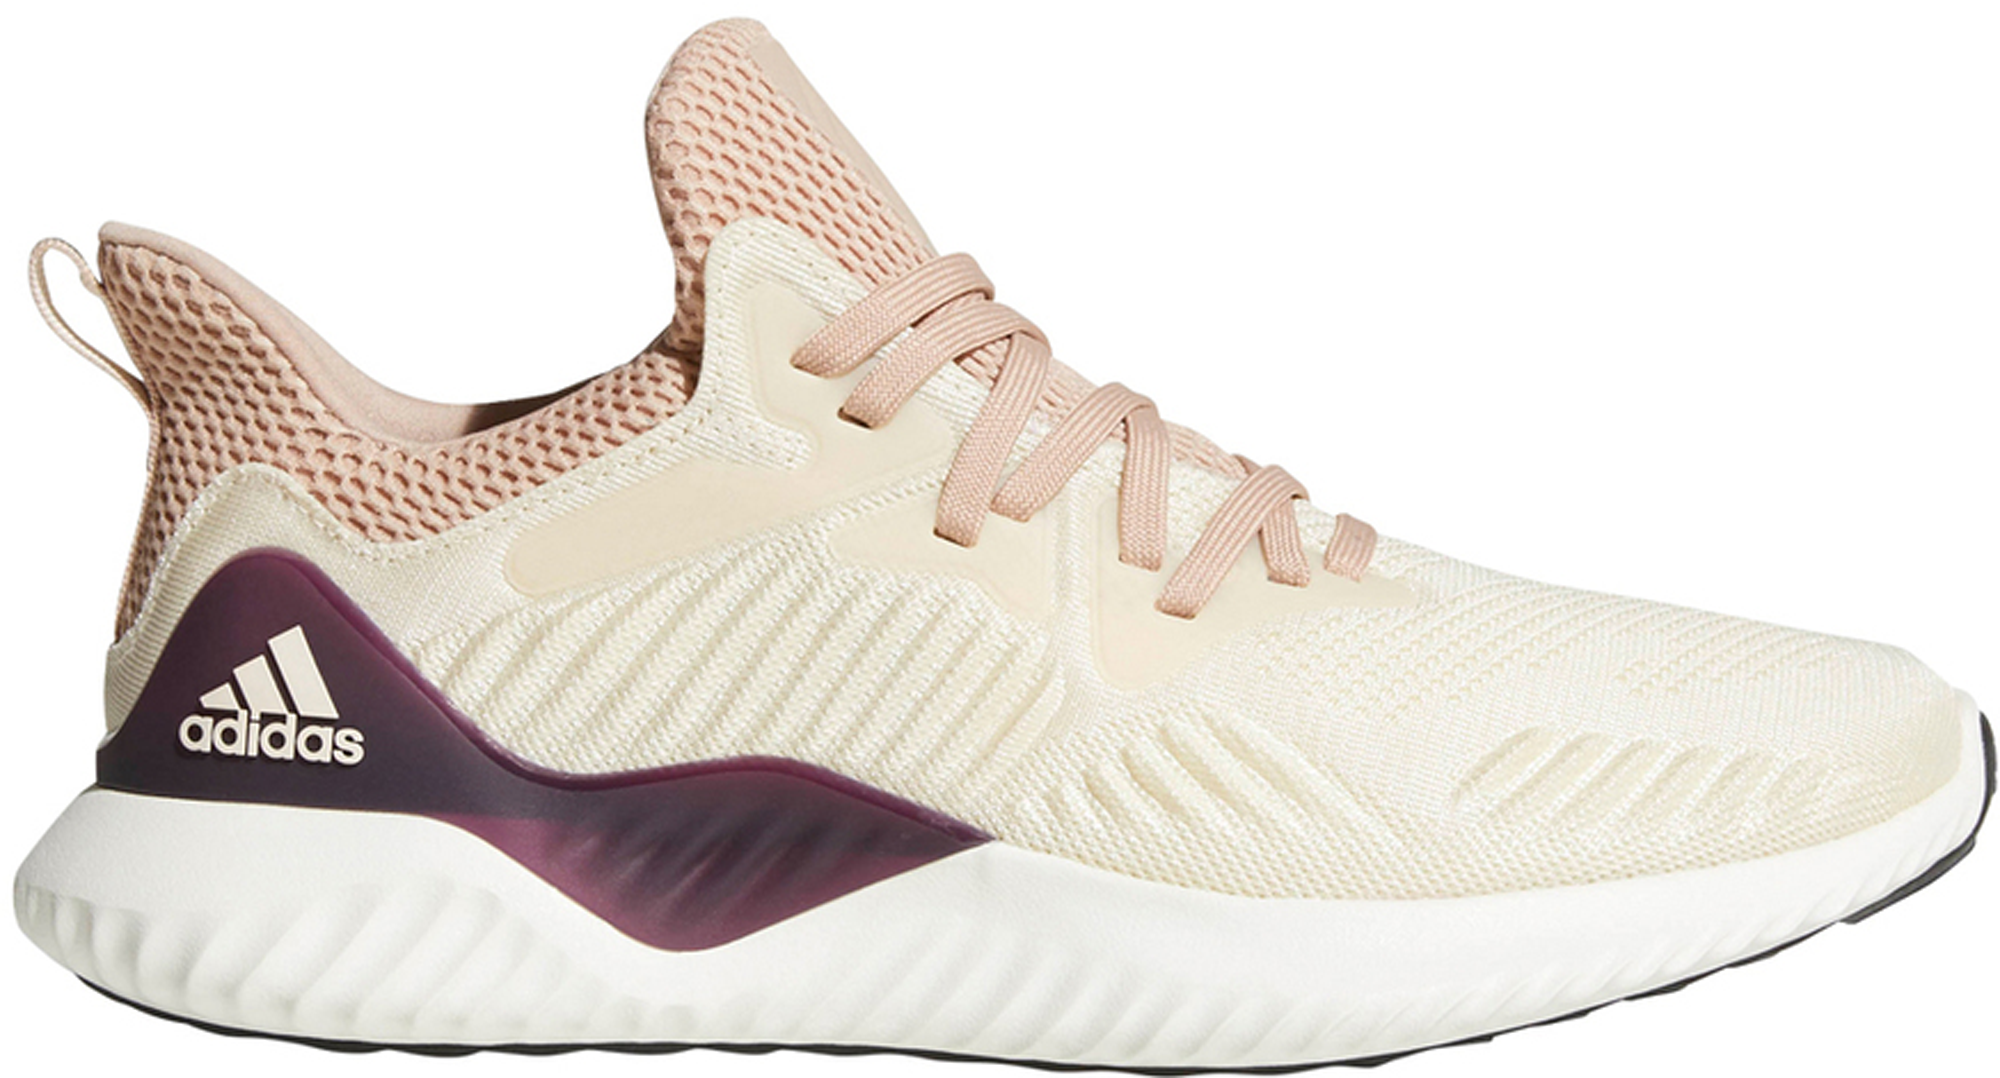 adidas alphabounce beyond outfit